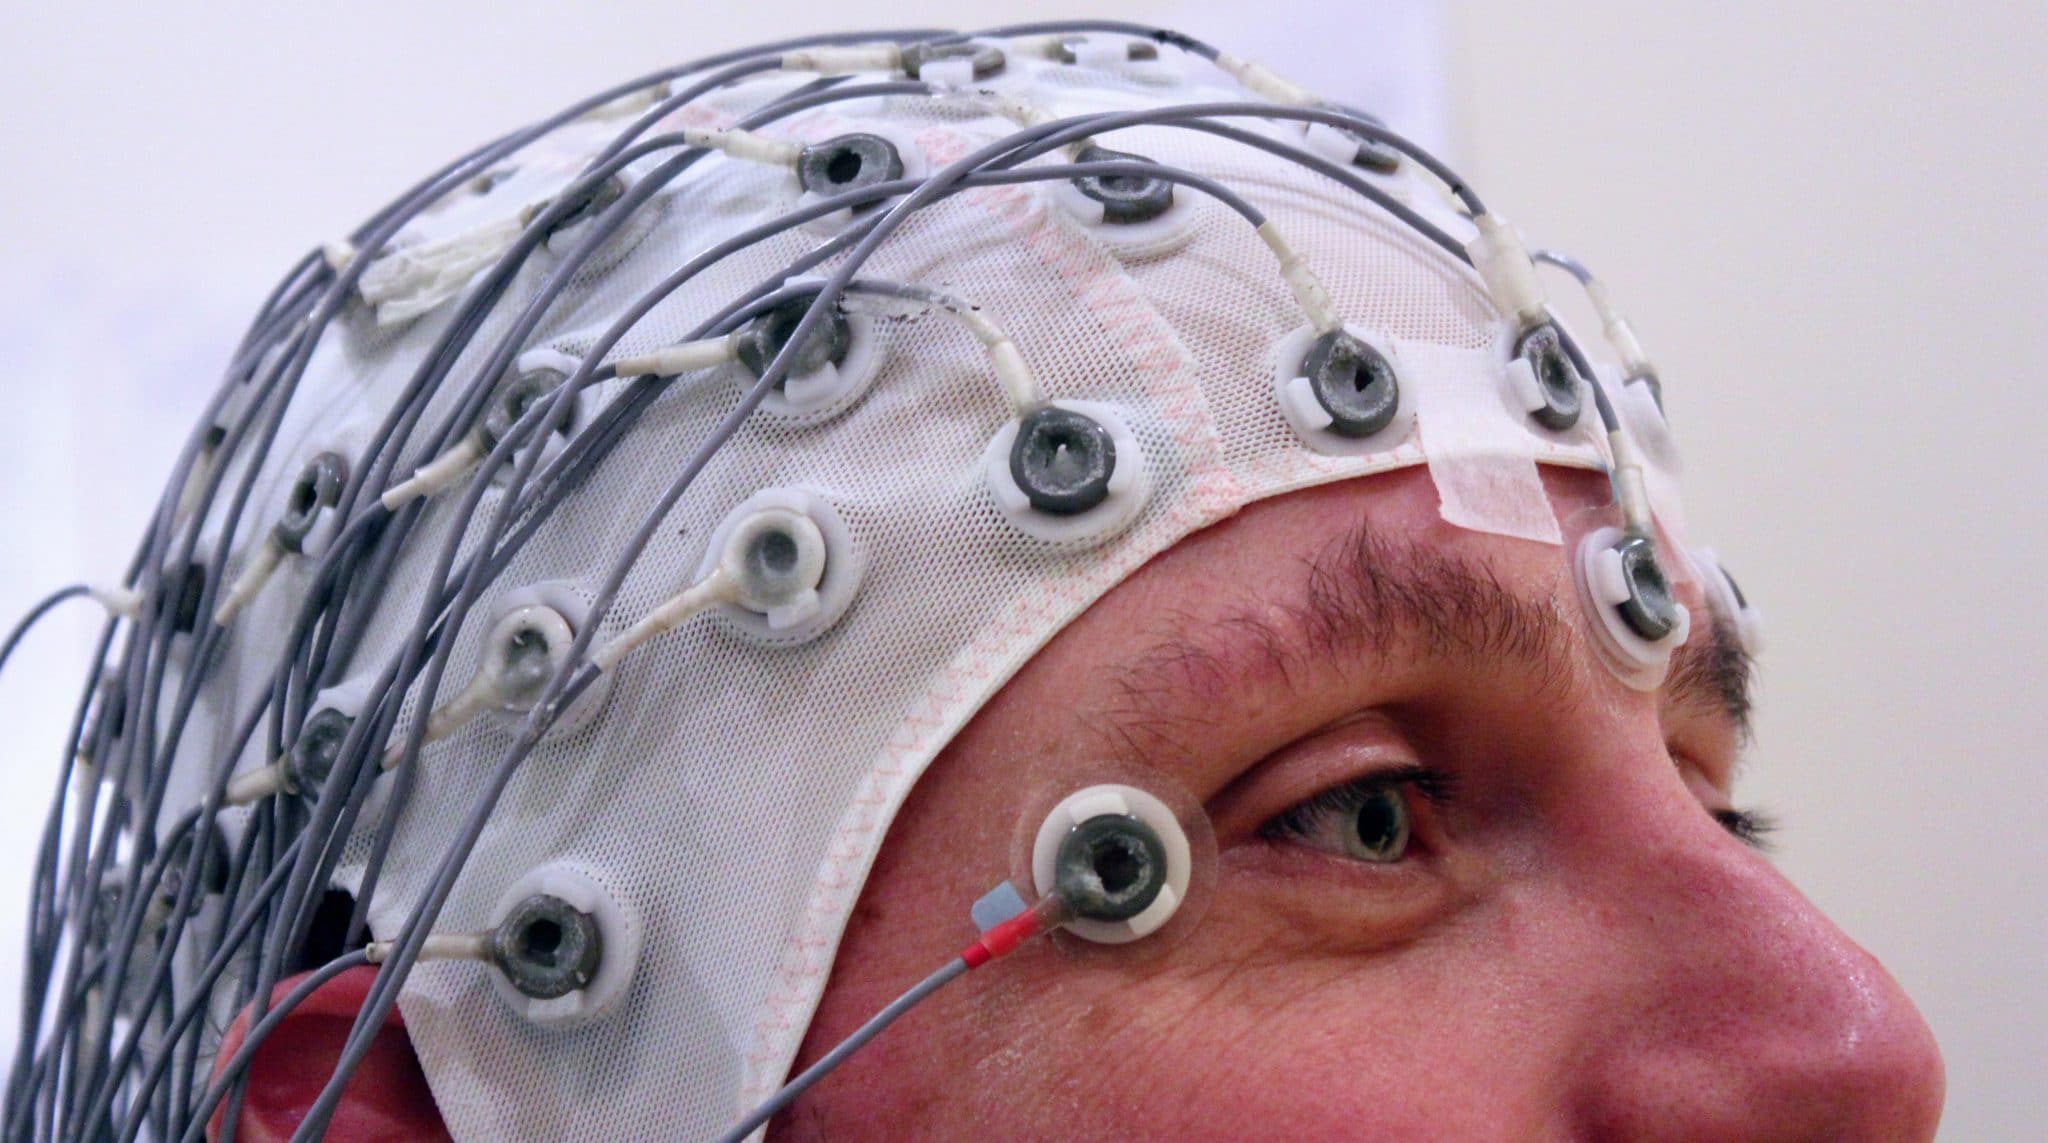 Psychology test, picture of a man with a brainwave measurement device on his head for a test.